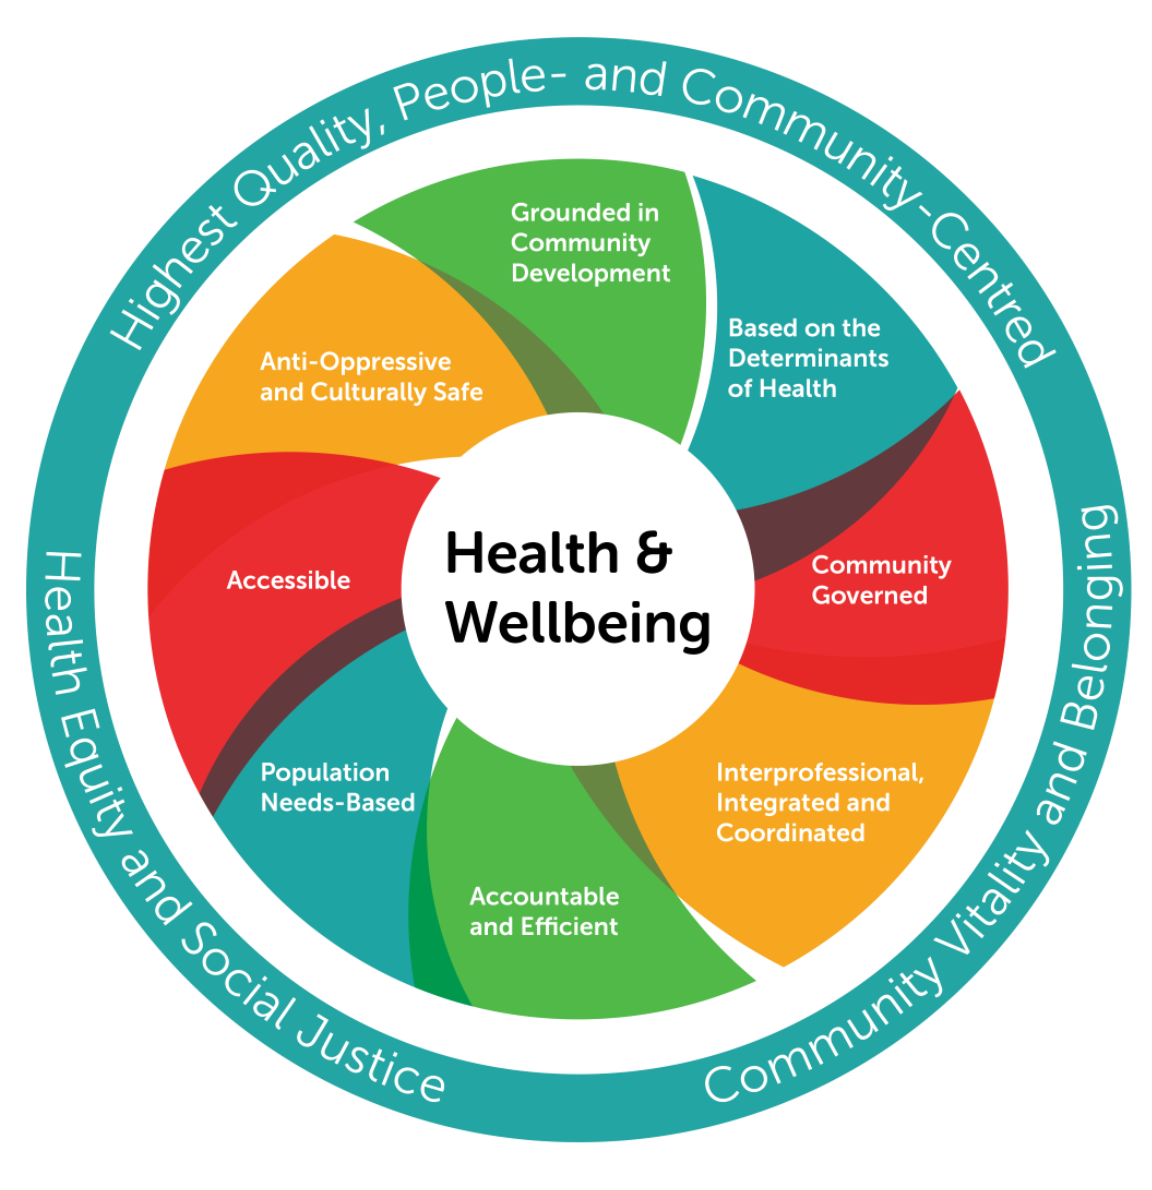 Model of Wholistic Wellbeing